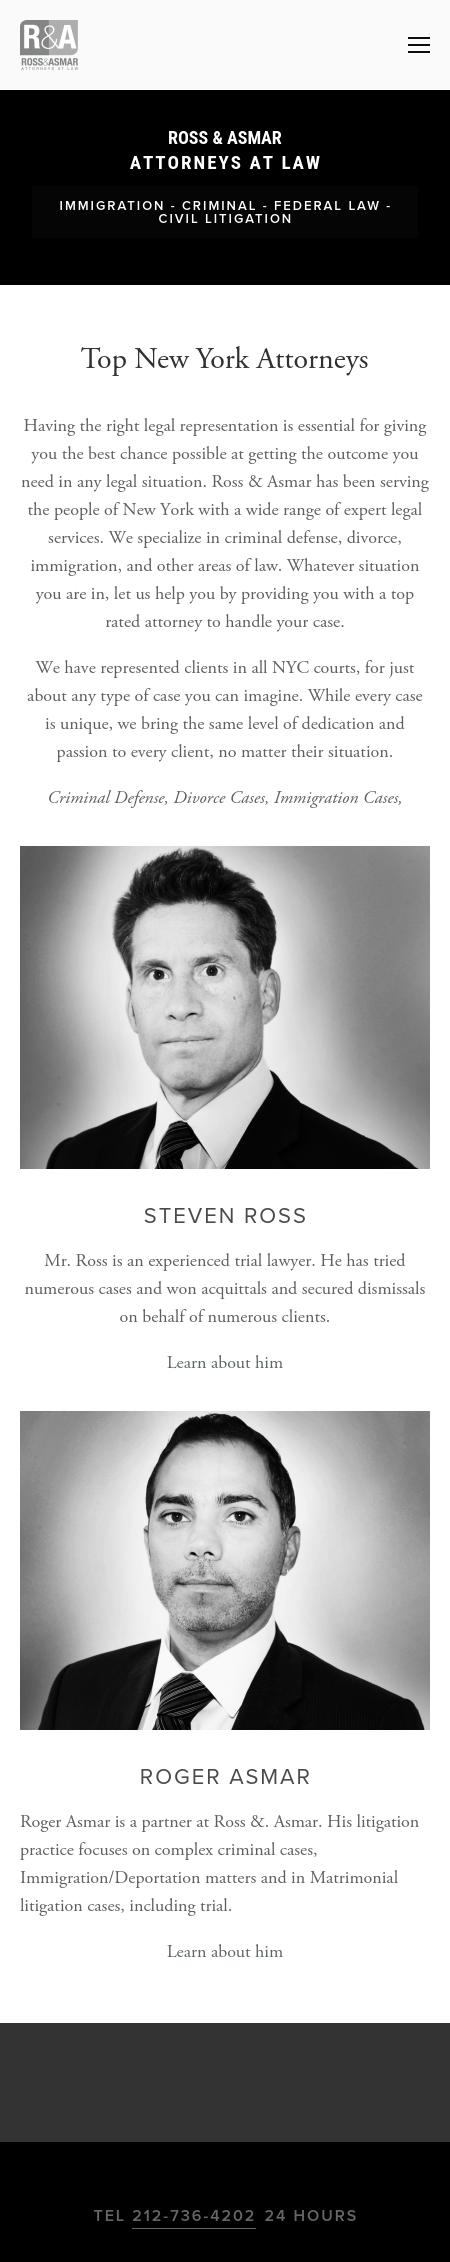 Ross And Asmar Attorneys At Law - New York NY Lawyers